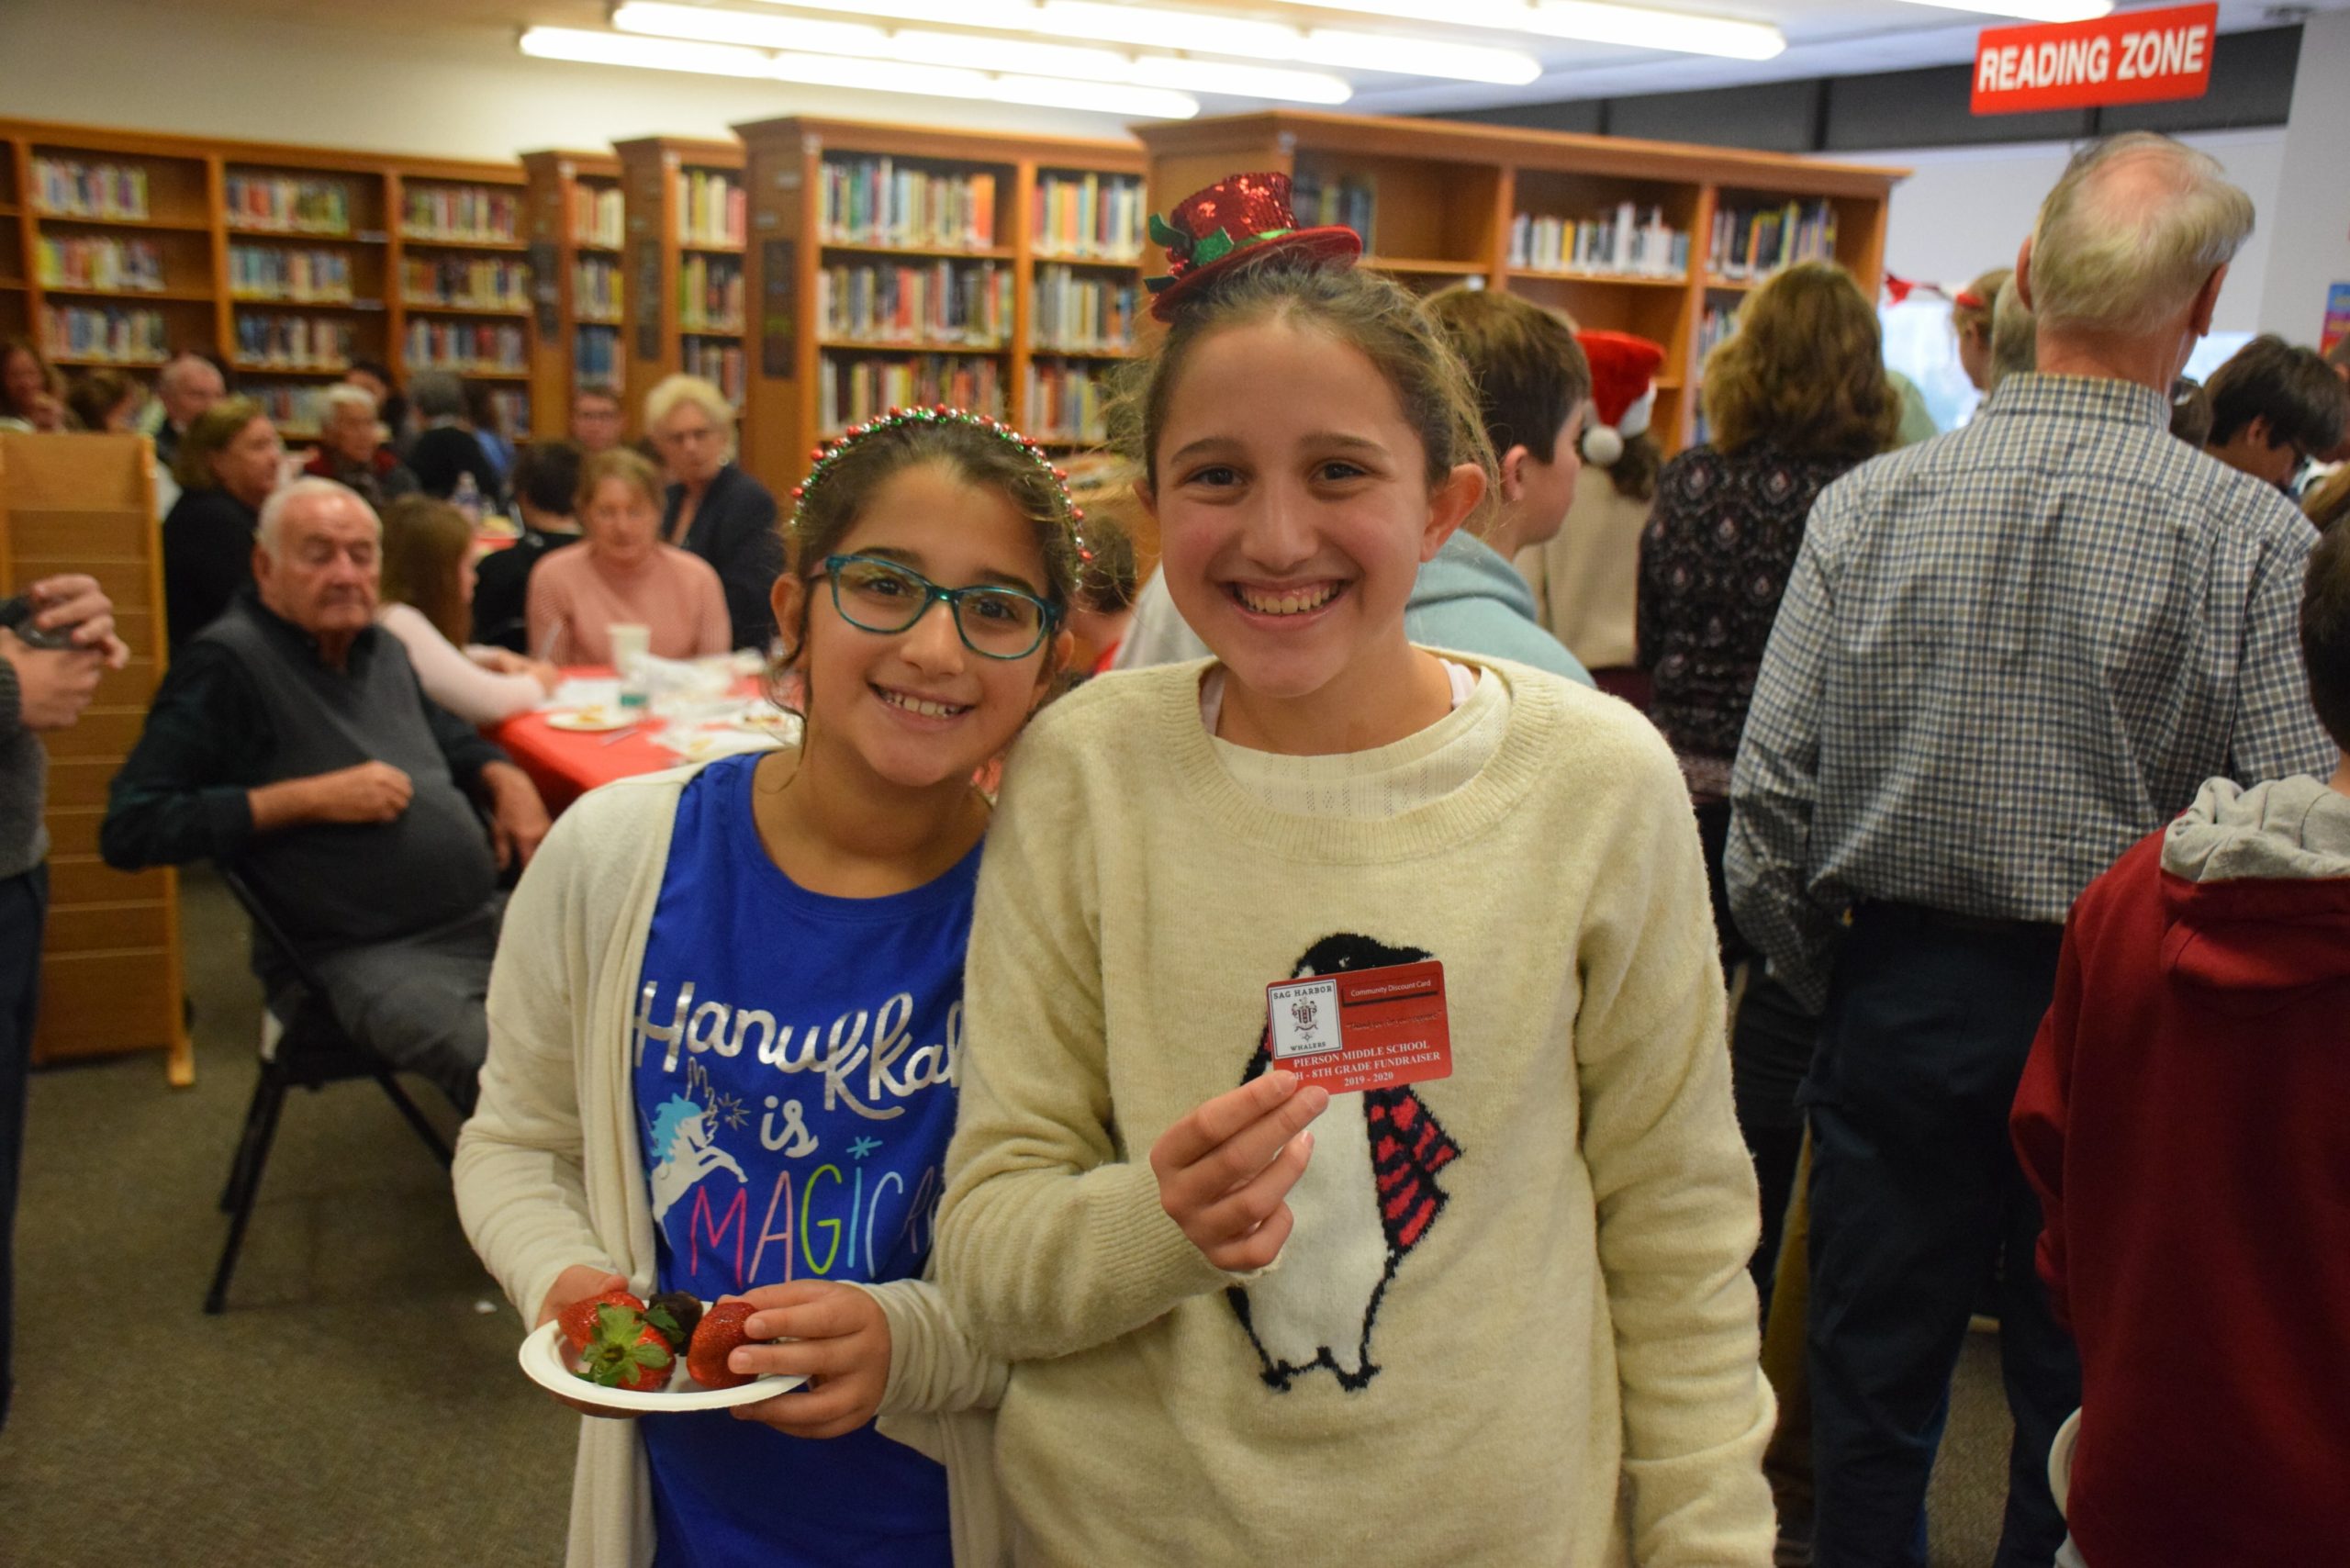 Pierson Middle School hosted its annual Snowflake Tea on December 13. At the annual event, students in grades six, seven and eight gathered with their grandparents and role models to share schoolwork and projects and kicked off the season with a holiday singalong. Lily and Isabelle Caplin visited local businesses to get their support for the school trip “rewards card.”